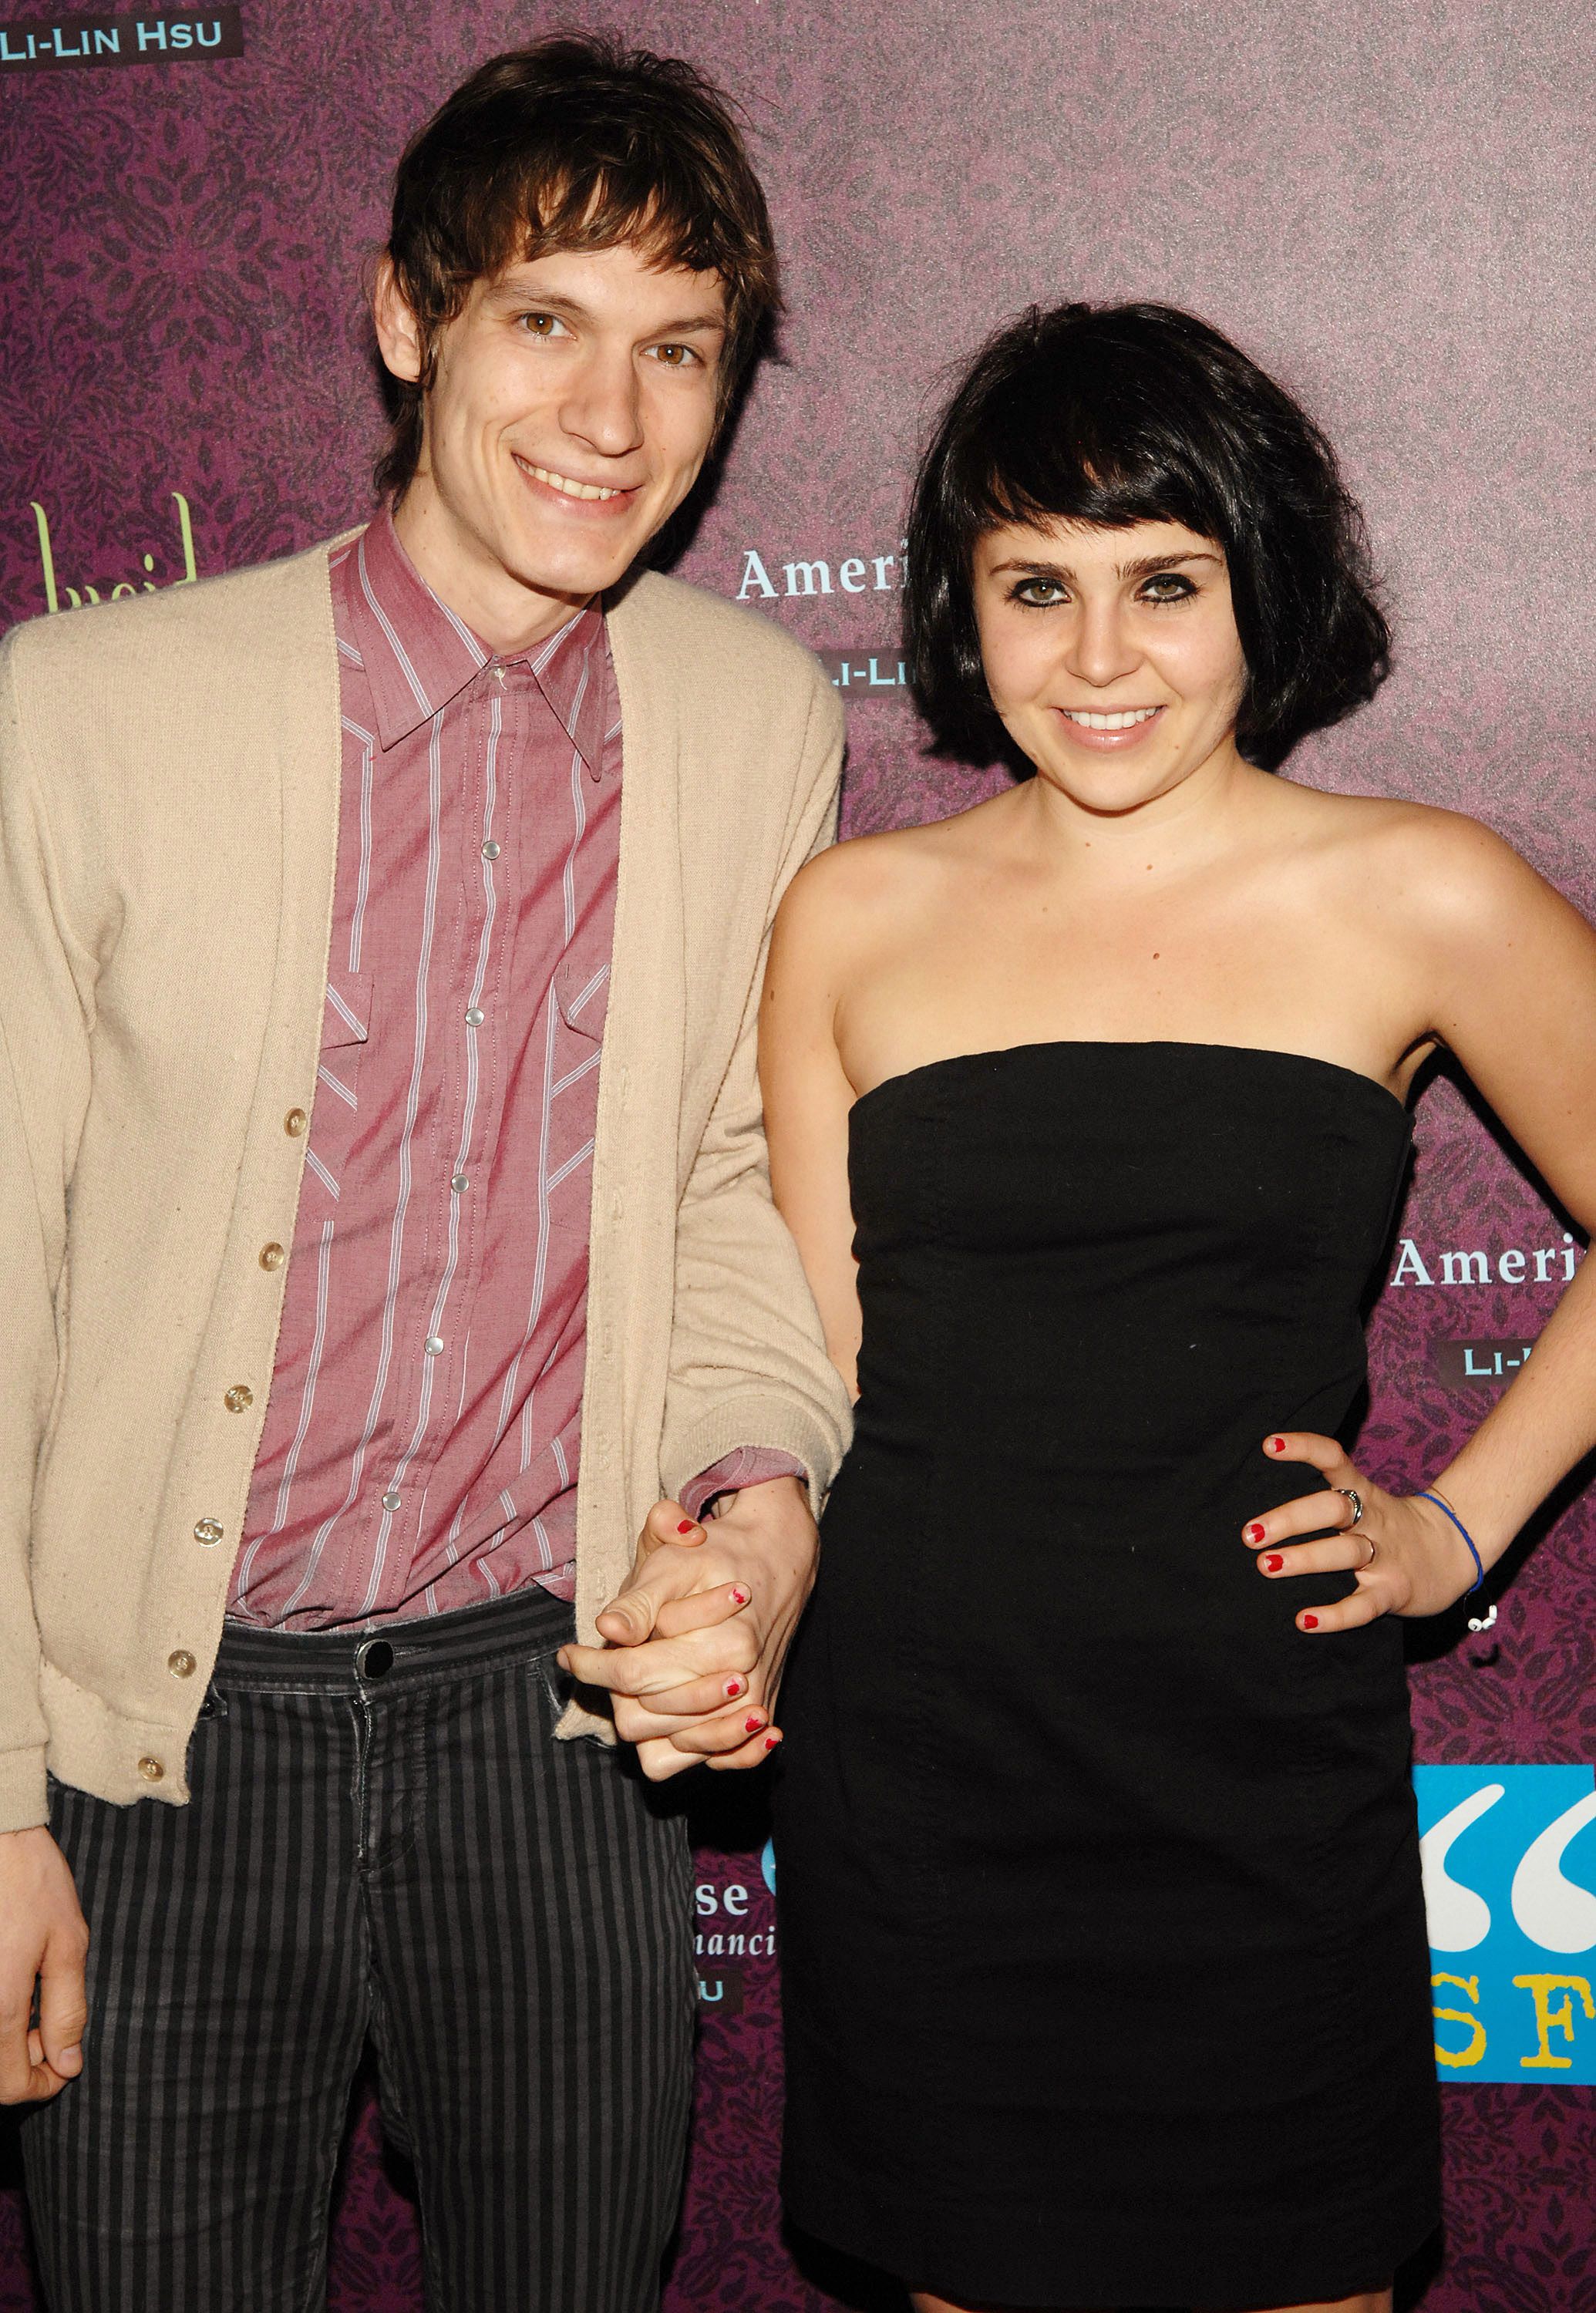 Mae Whitman and Landon Pigg during the "Bohemian Dream: A Party for the Senses" Benefiting Young Story Tellers Foundation at Bardot on March 6, 2011, in Los Angeles, California. | Source: Getty Images